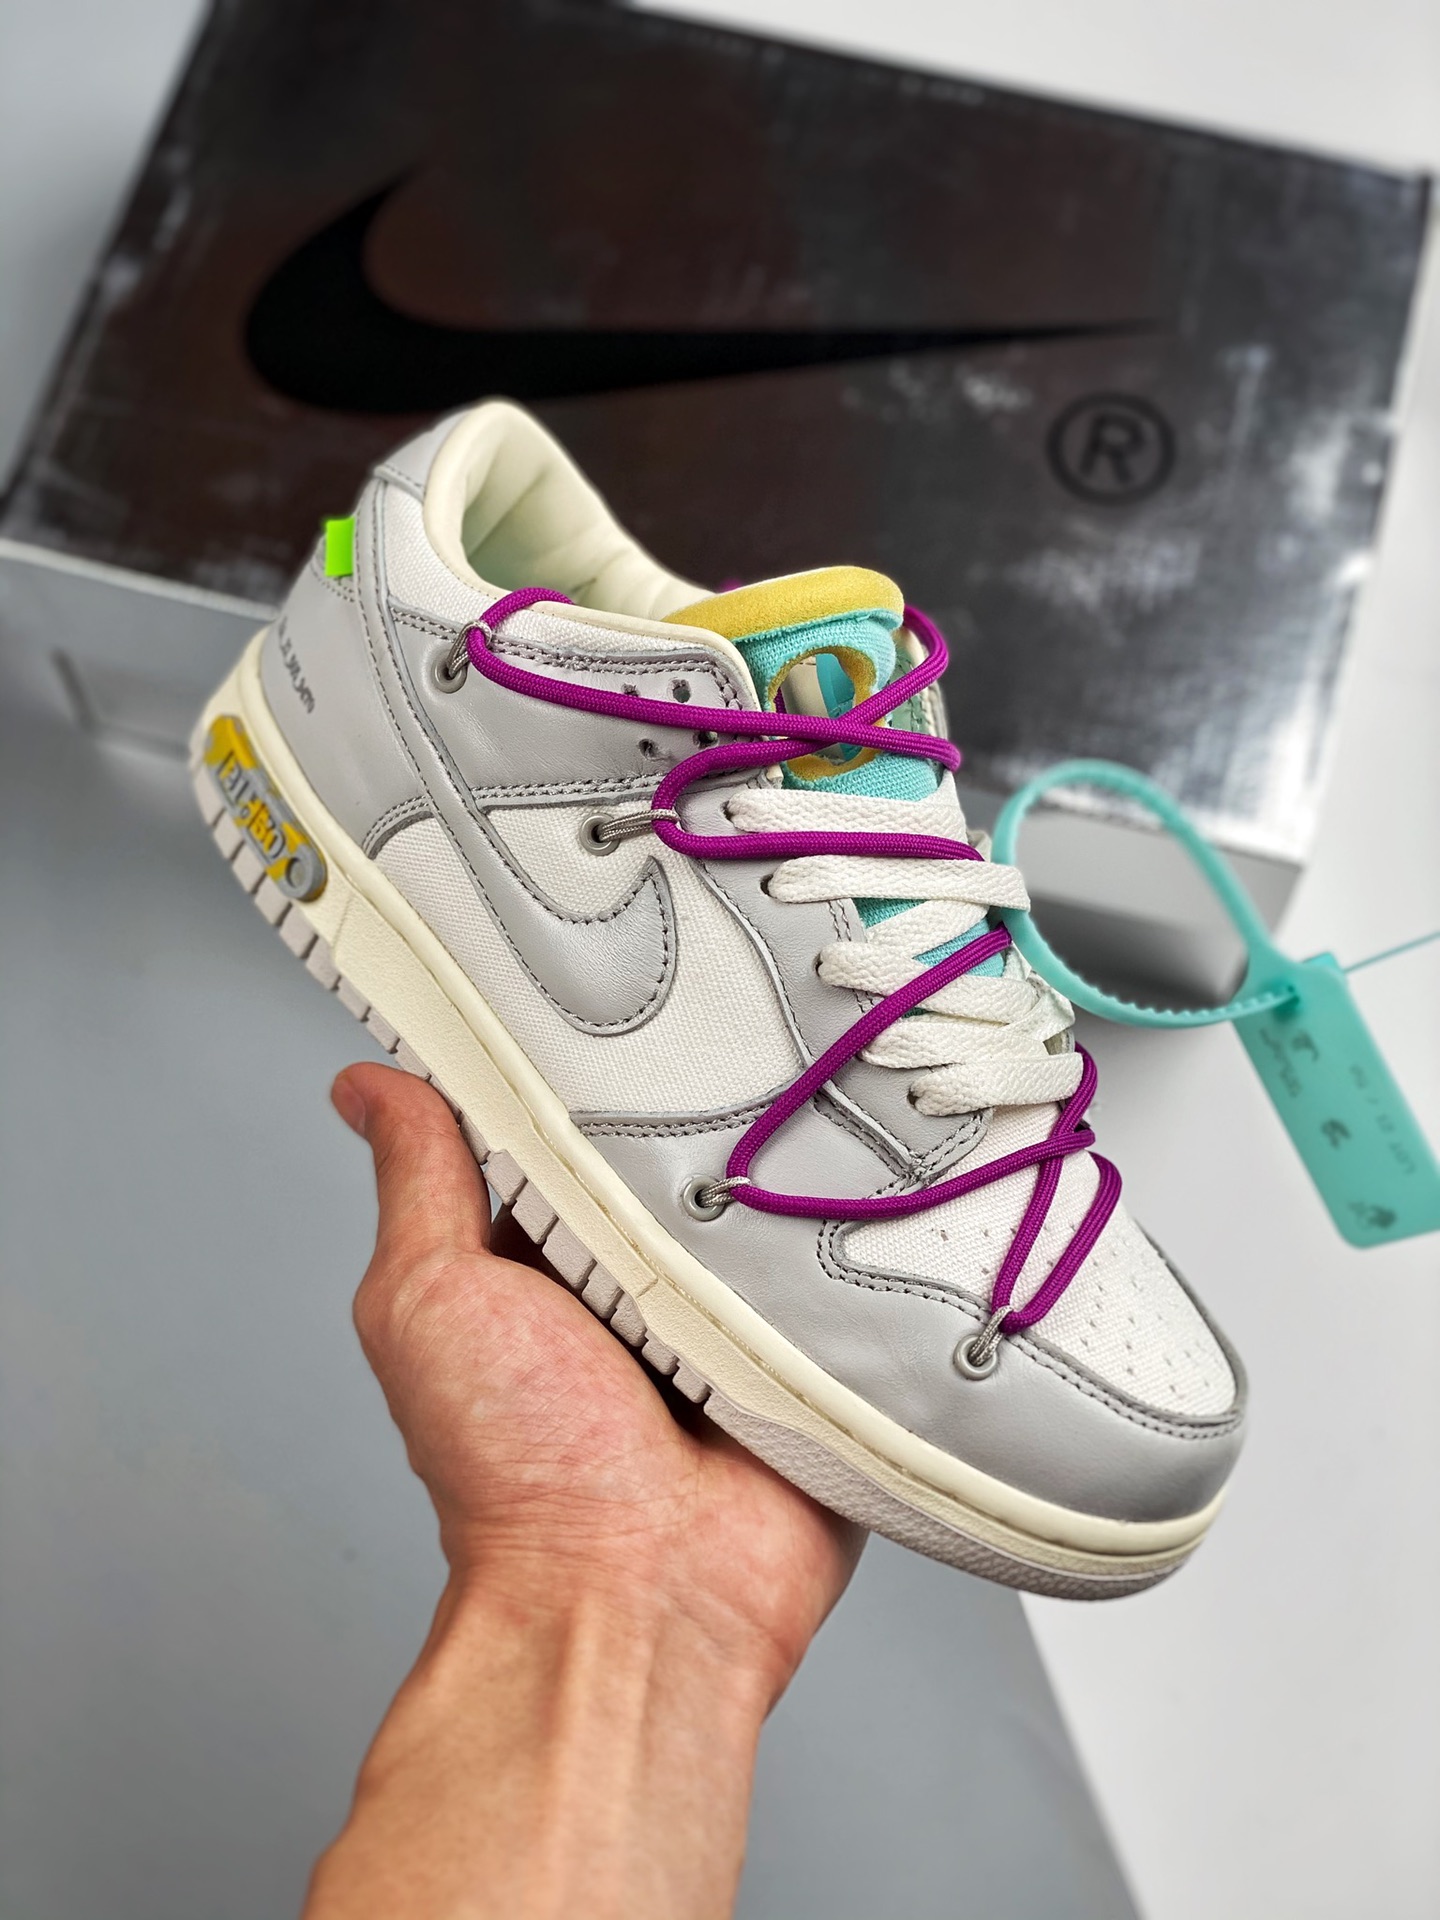 Шнуровка dunk. Nike Dunk Low off White 50. Nike Dunk Low off White. Nike SB Dunk off White. Off-White x Nike Dunk Low the 50.